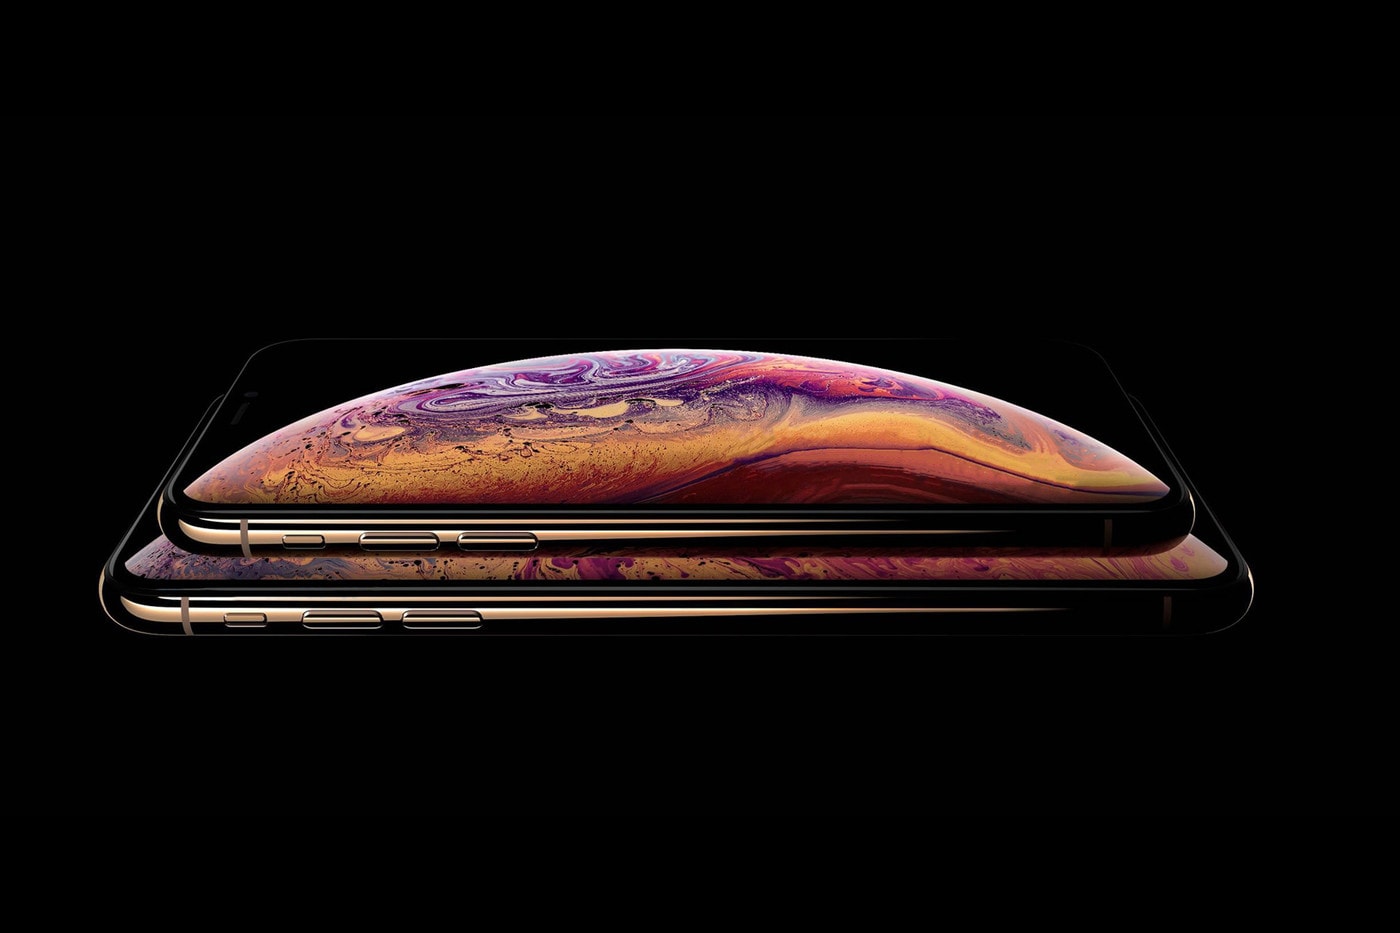 Apple iPhone XS XR Max Names Confirmed Leaked Leak Own Website Backend XML .xml File Technology Tech Buy Purchase Coming Soon Pre-Order Conference Announcement